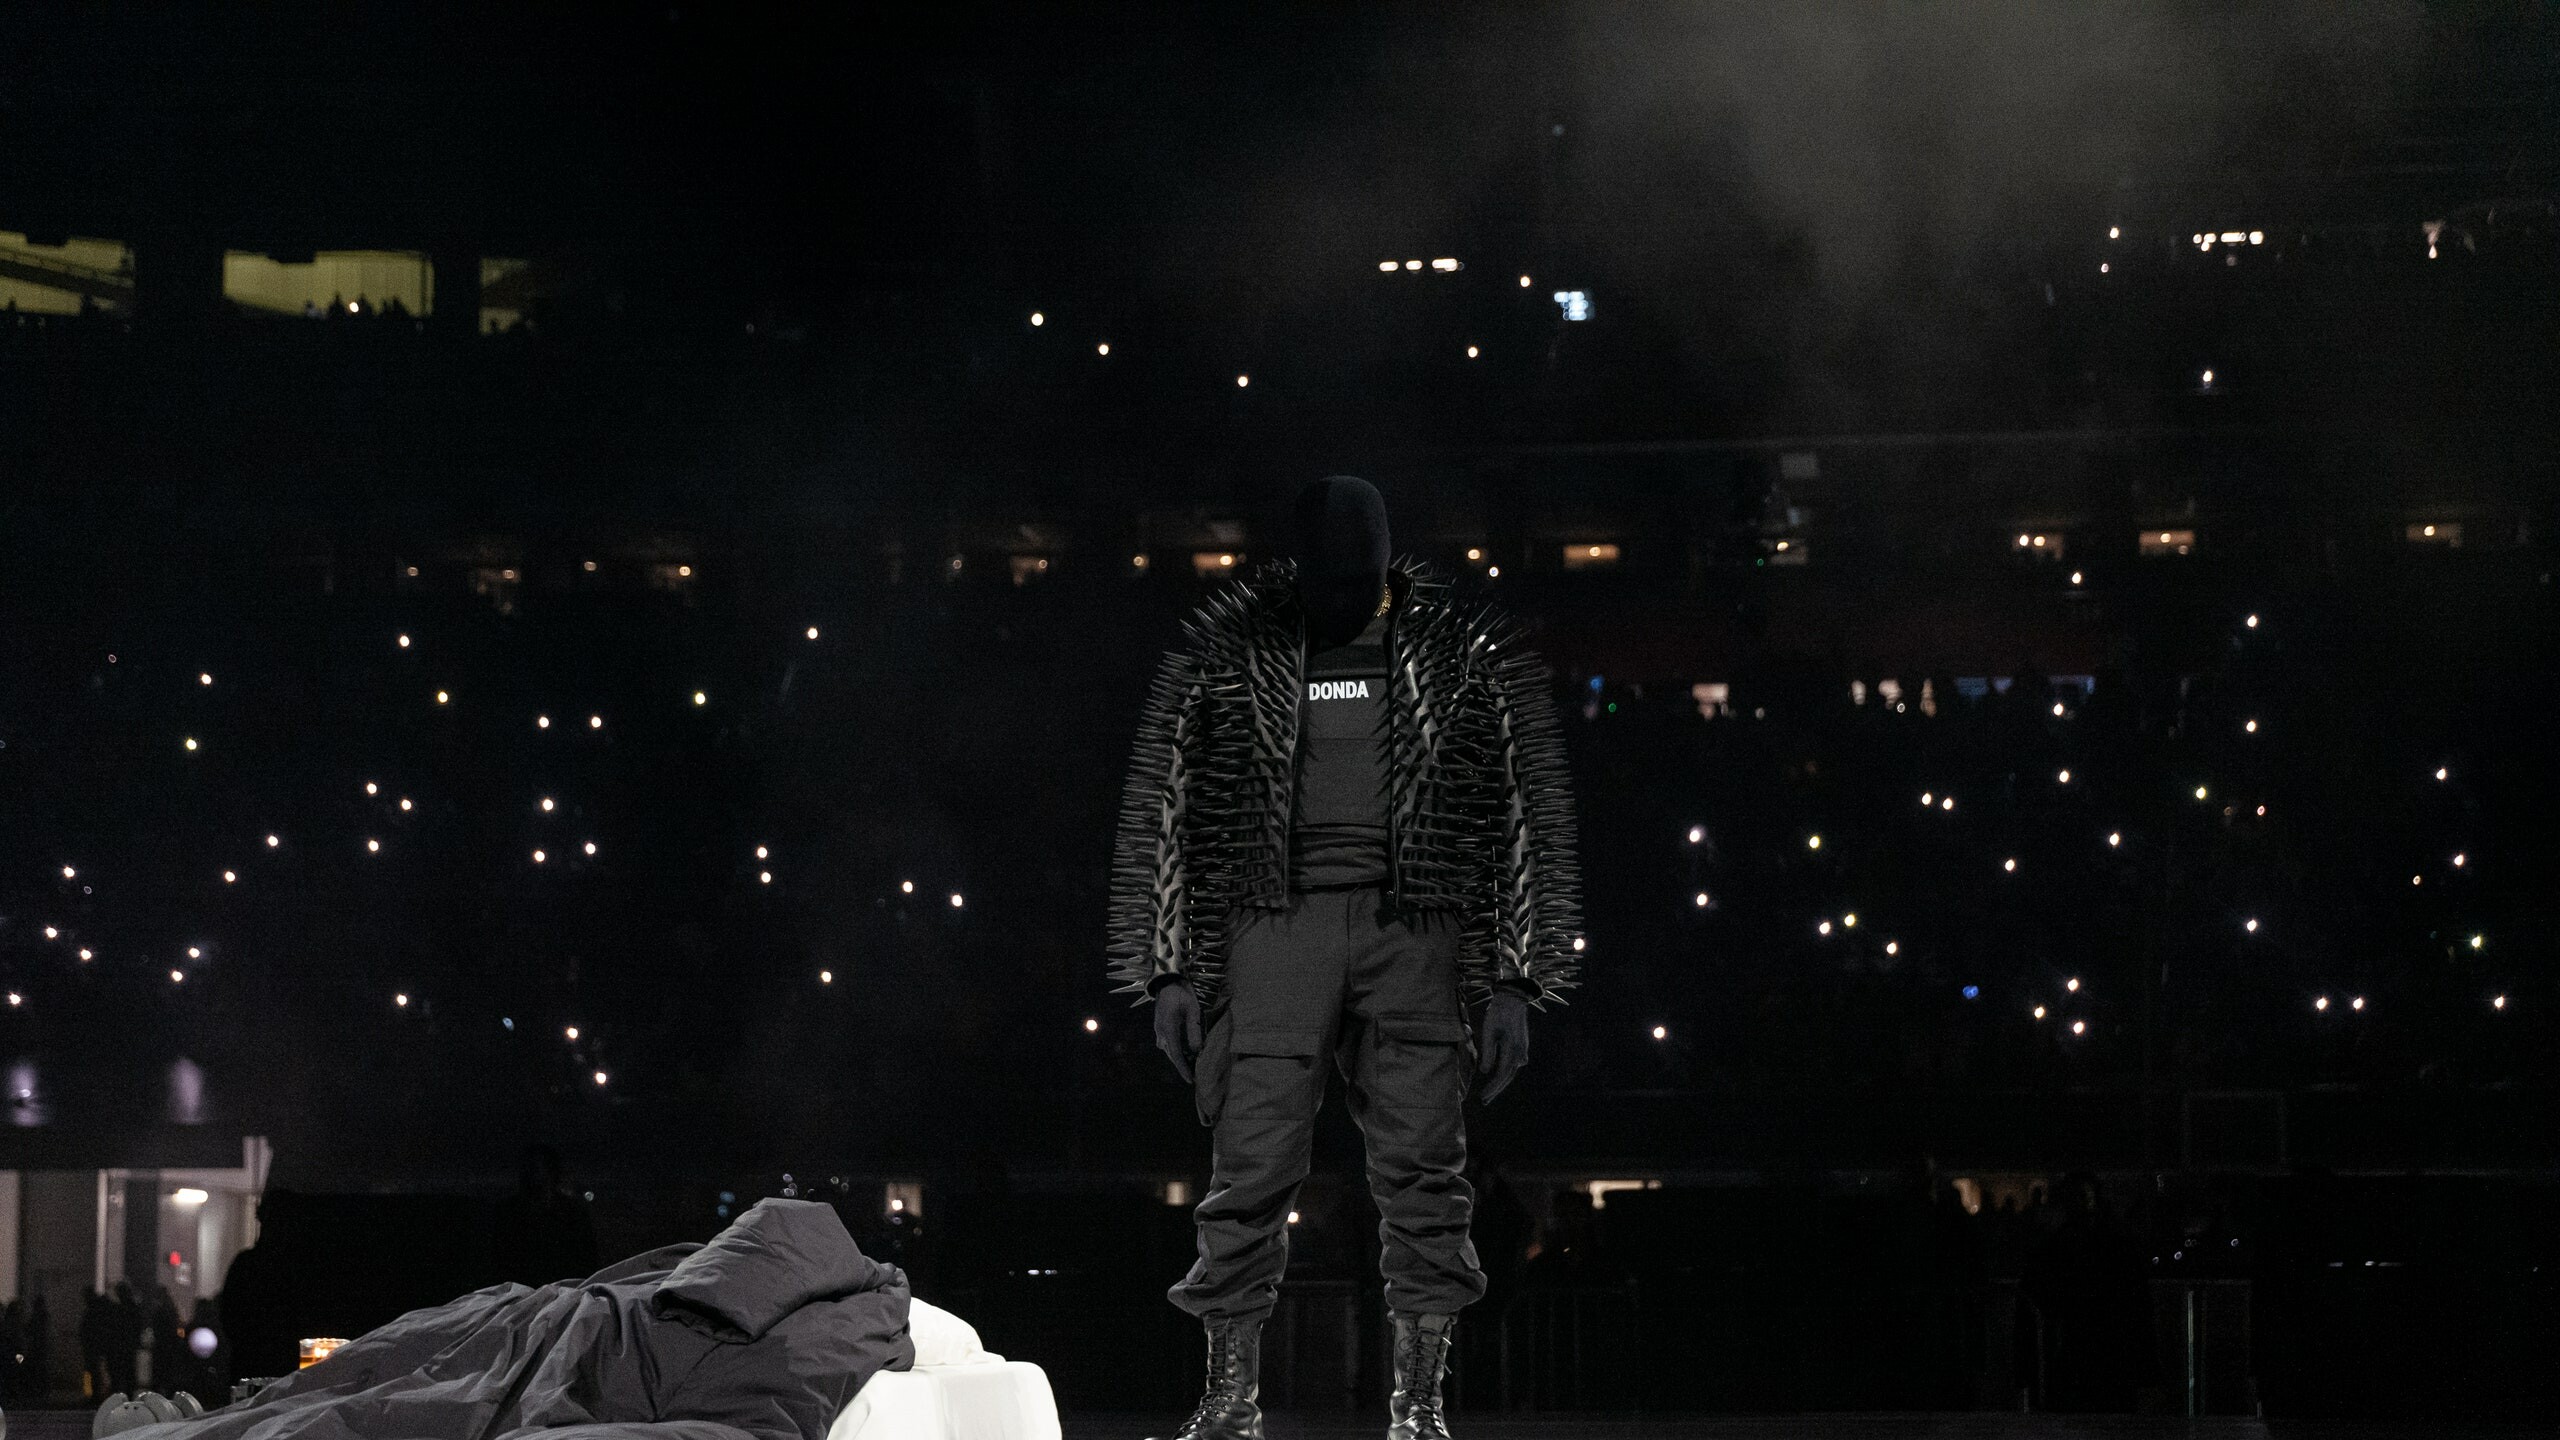 Kanye West: Listening party, Chicago, Donda, Provocative performance art. 2560x1440 HD Background.